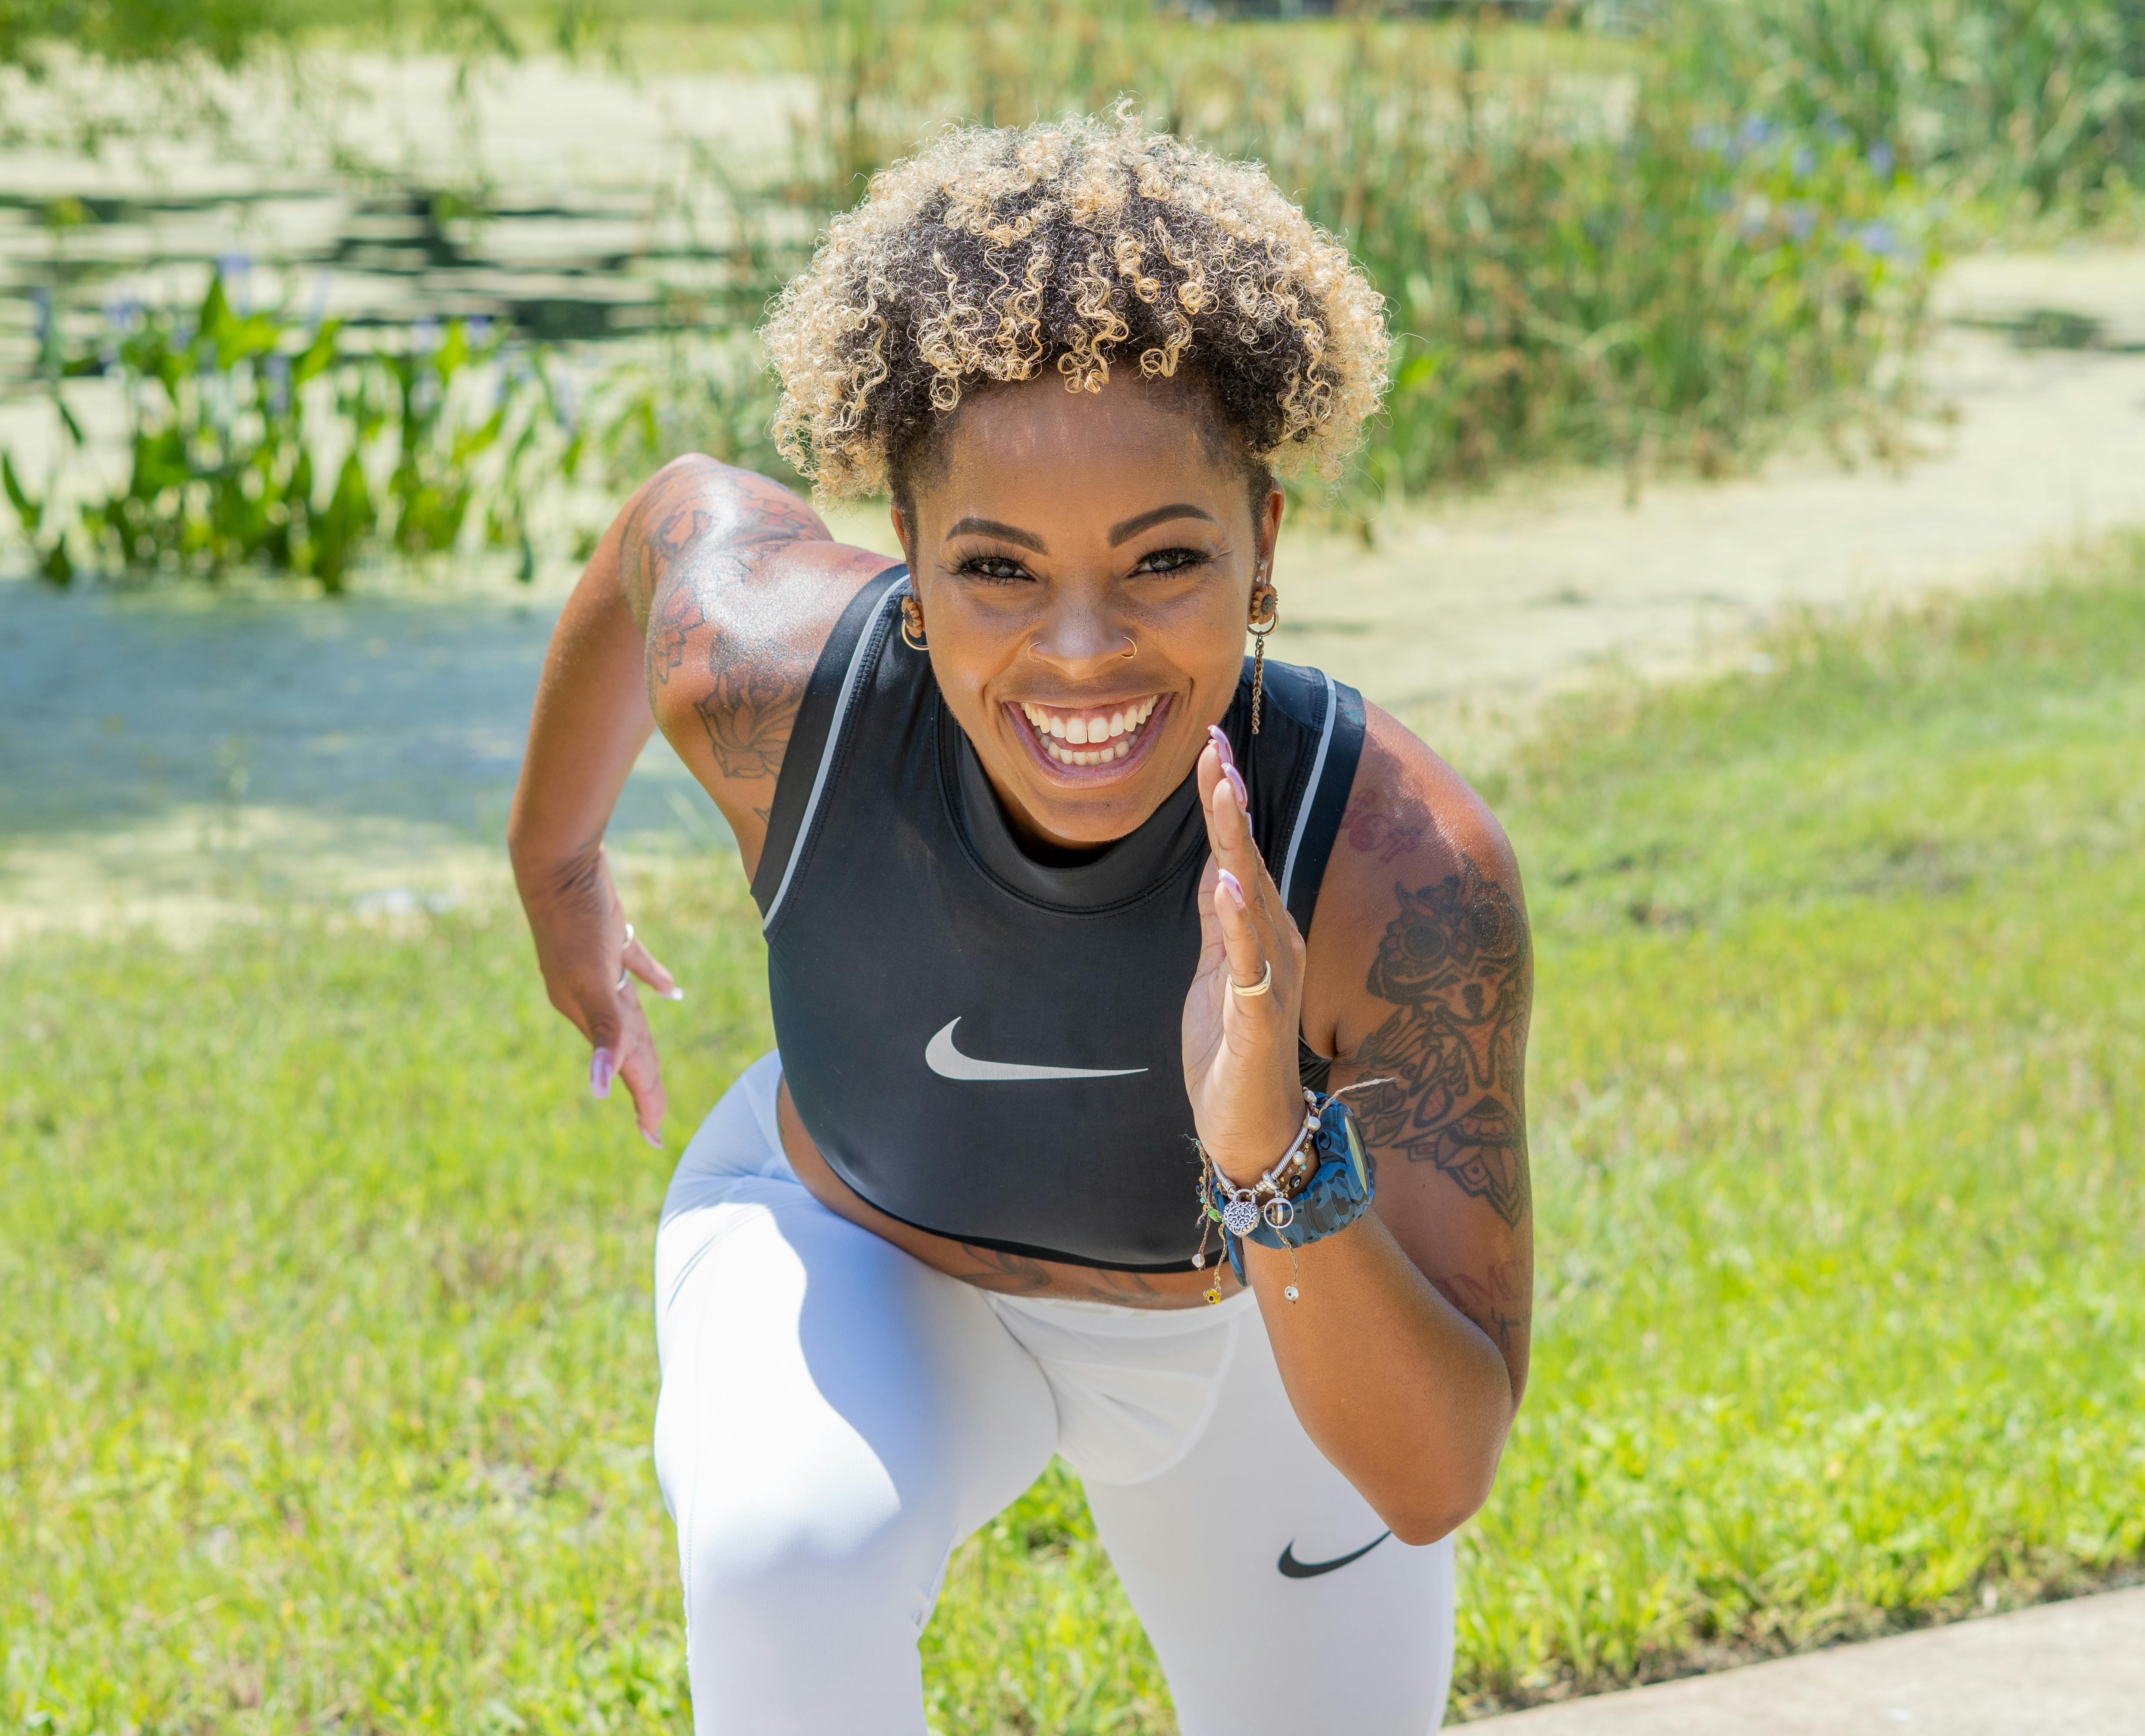 photo of a woman with curly hair doing a running pose